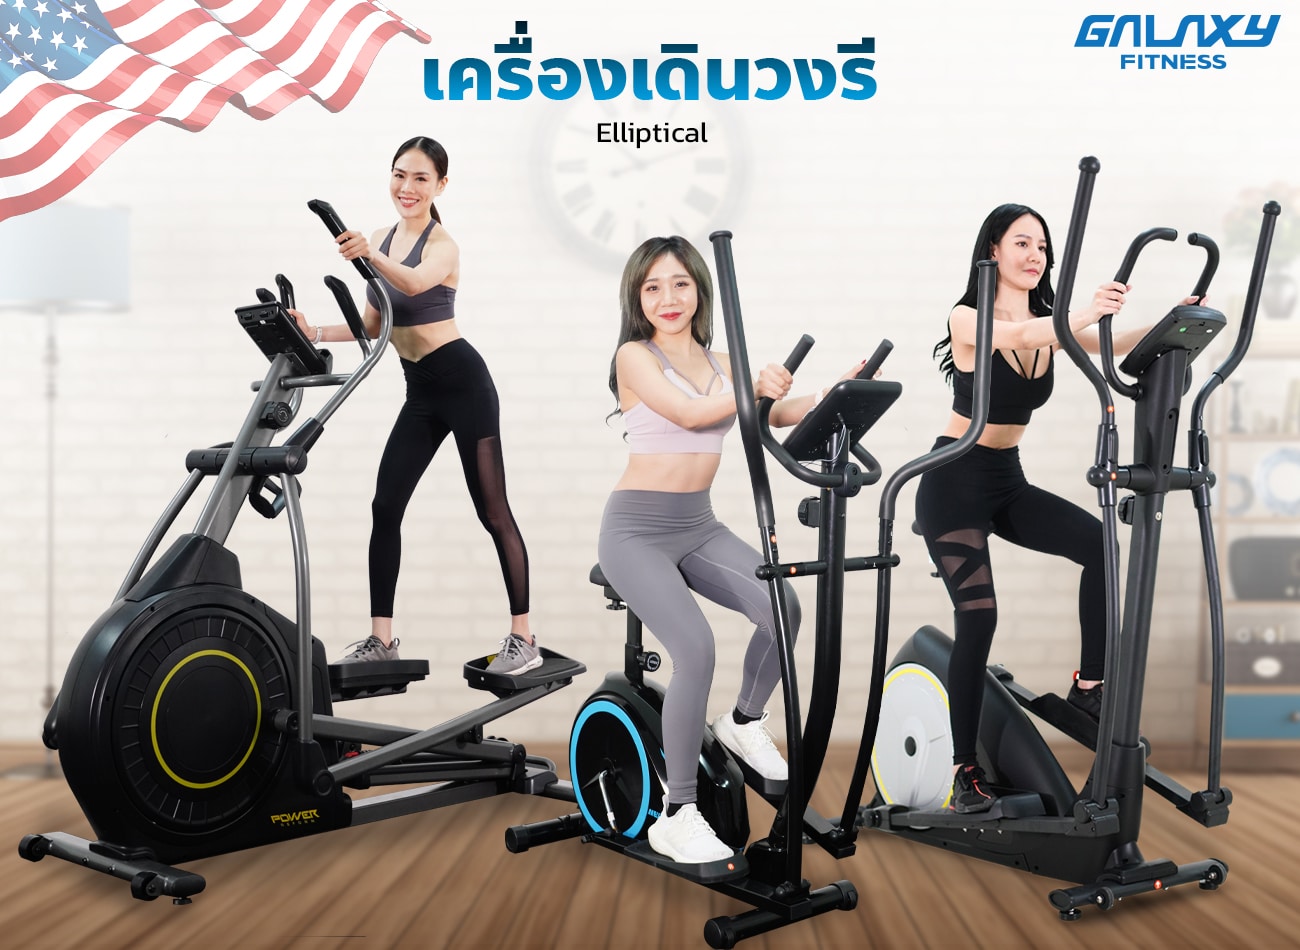 Home - Galaxy Fitness